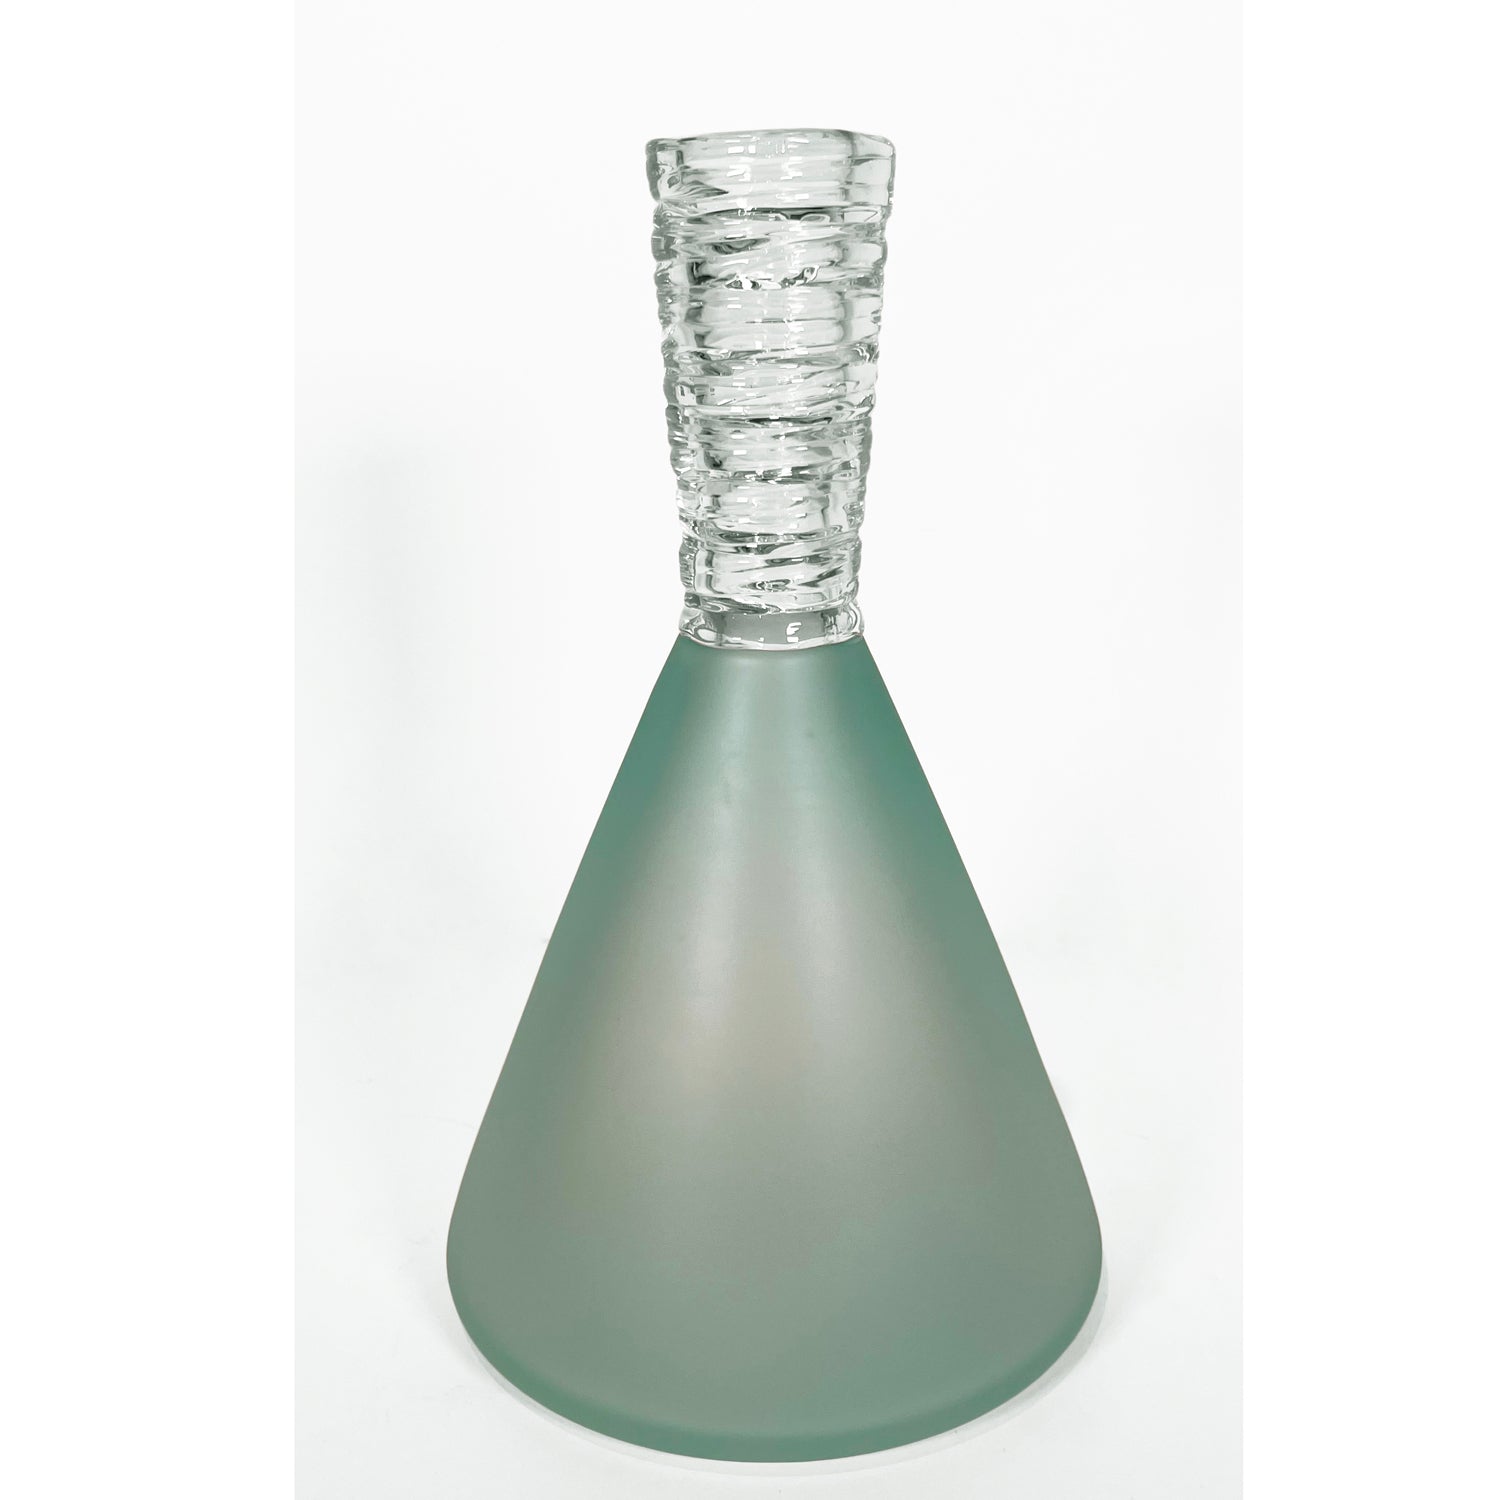 Jaan Andres - Potions Ice Cone Medium, 11" x 6" x 6"